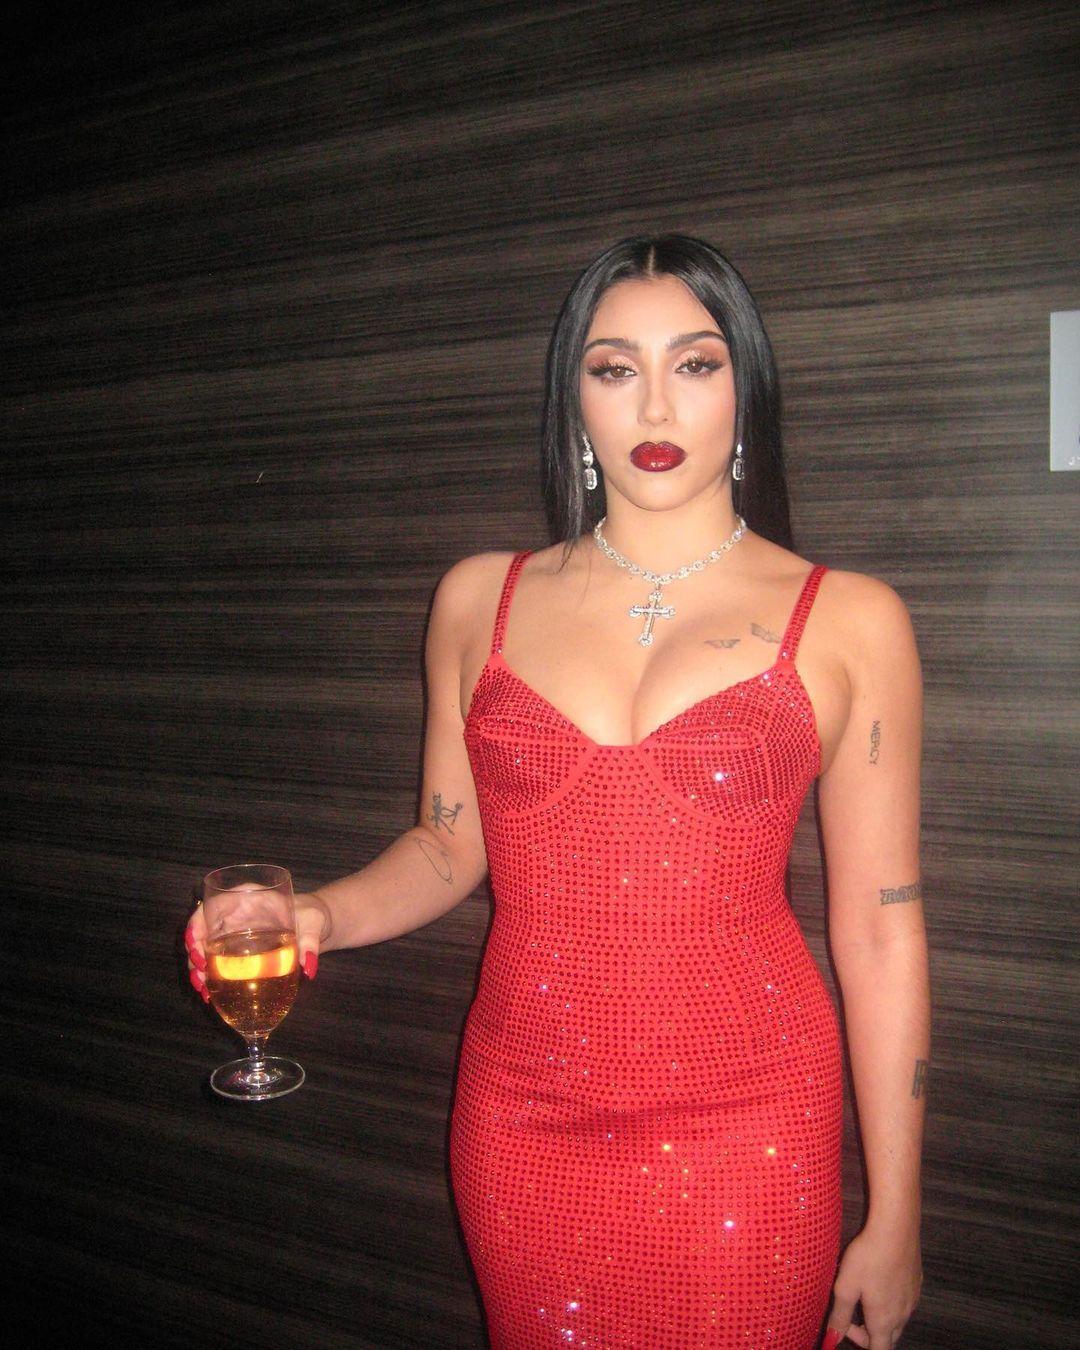 Lourdes Leon posing for the camera in a red dress.